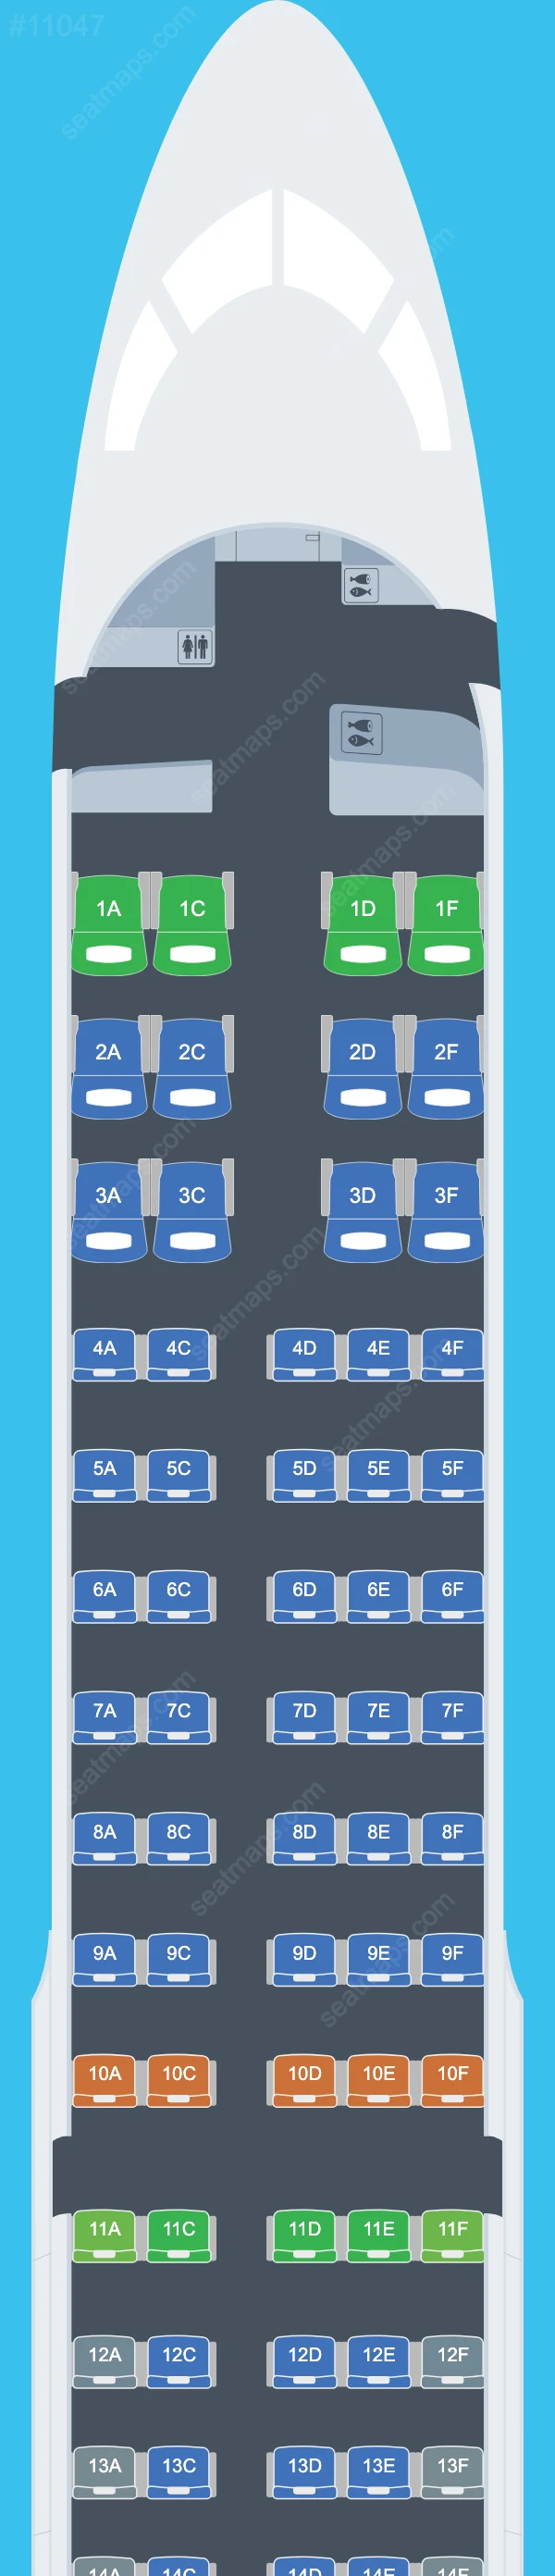 Breeze Airways Airbus A220 Seat Maps A220-300 V.2